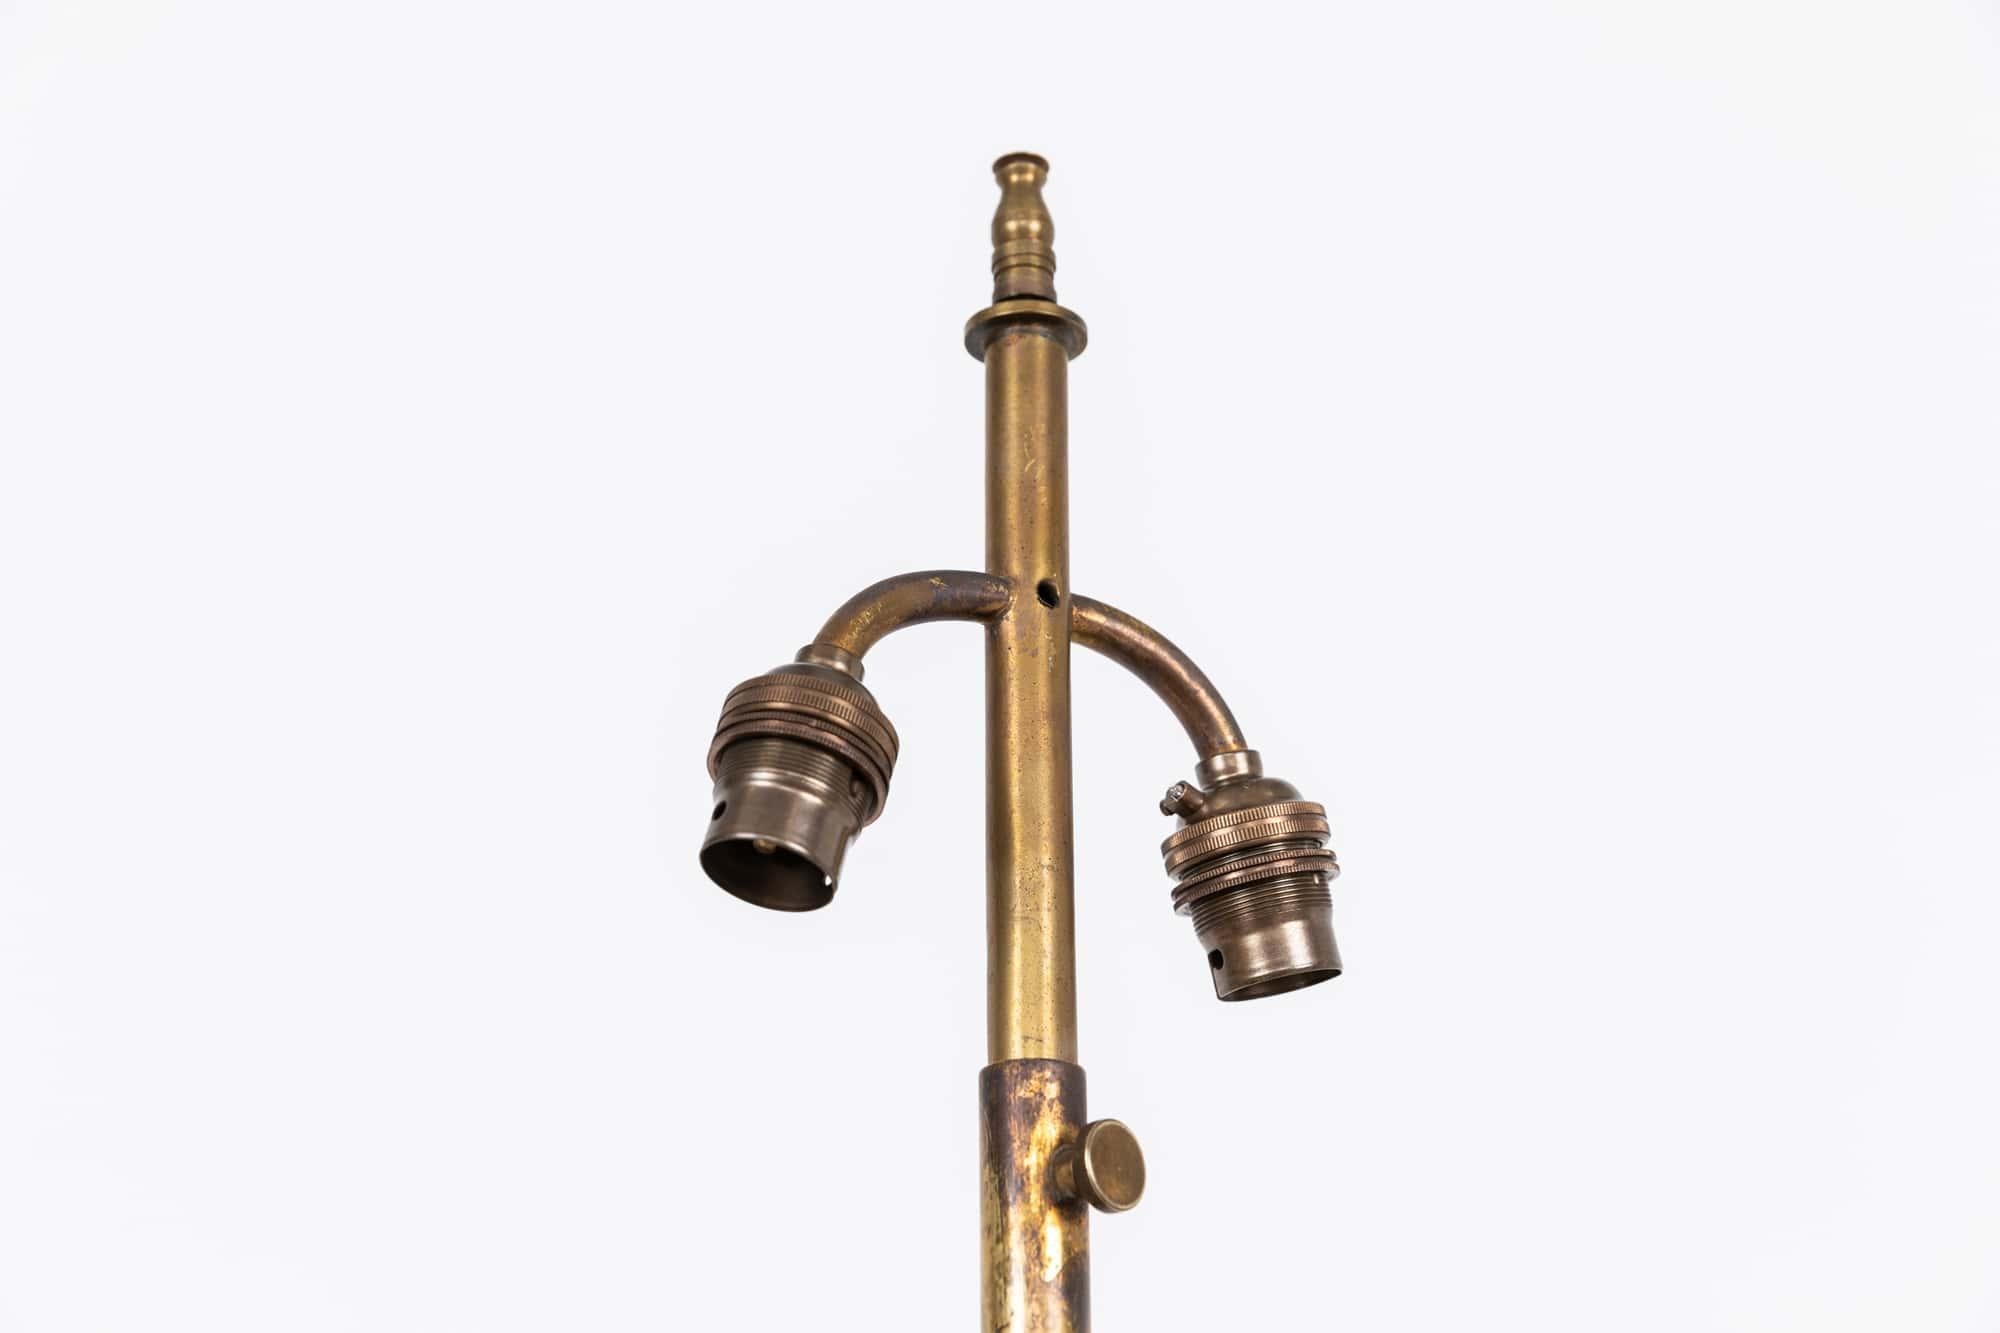 

A very elegant turned large brass table lamp. c.1900

Likely converted from a former candlestick, this lamp is of exceptional quality and has developed a beautiful patina over time. Can be extended in height.

Rewired with 2m of black twist flex